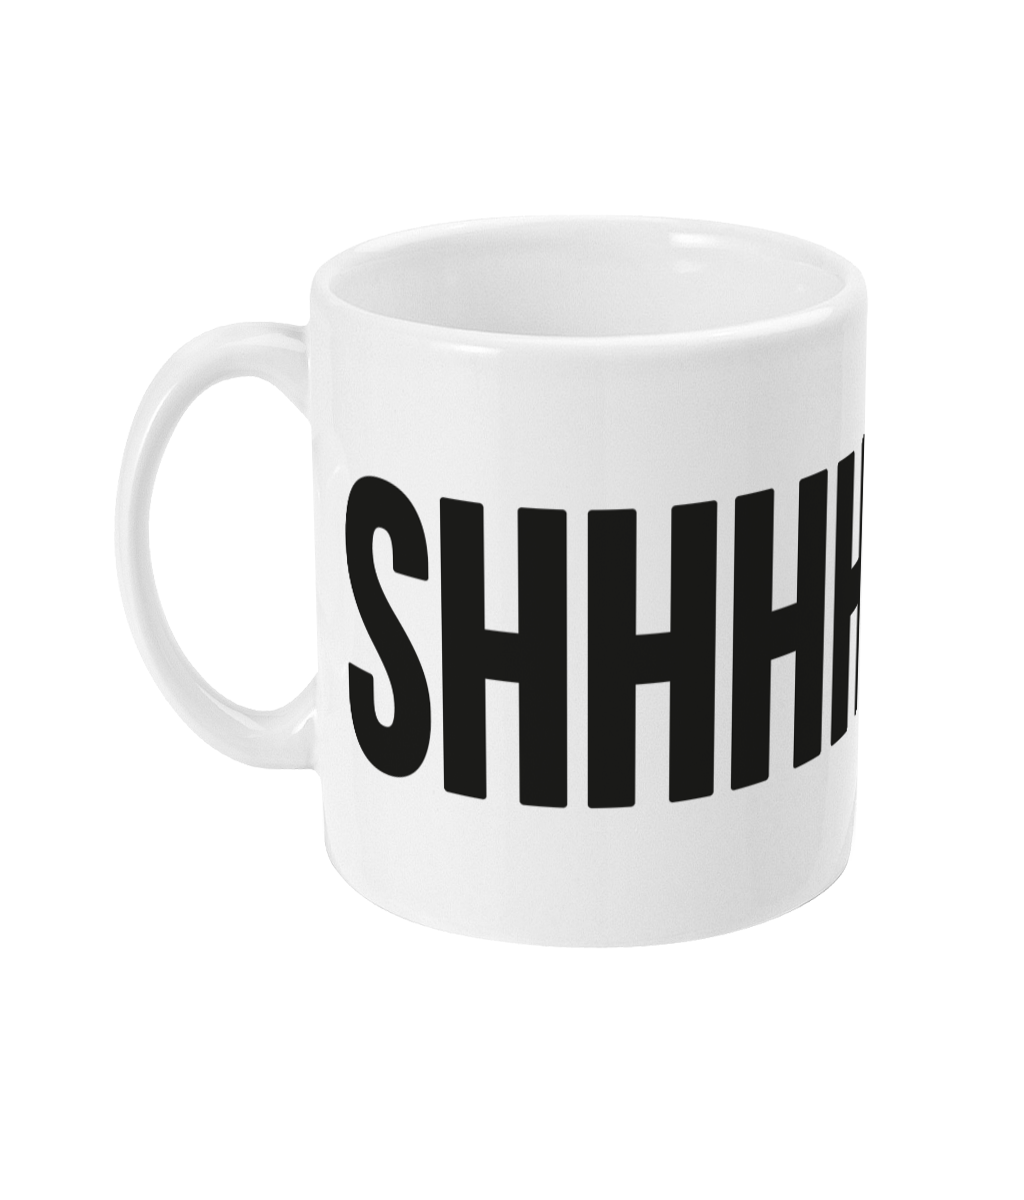 A unique mug featuring bold statement. Brighten up your desk with this bold typography design. It will make the perfect gift for someone whether it's for a birthday, Christmas or any other special occasion.    Mug reads: SHHHHHH.